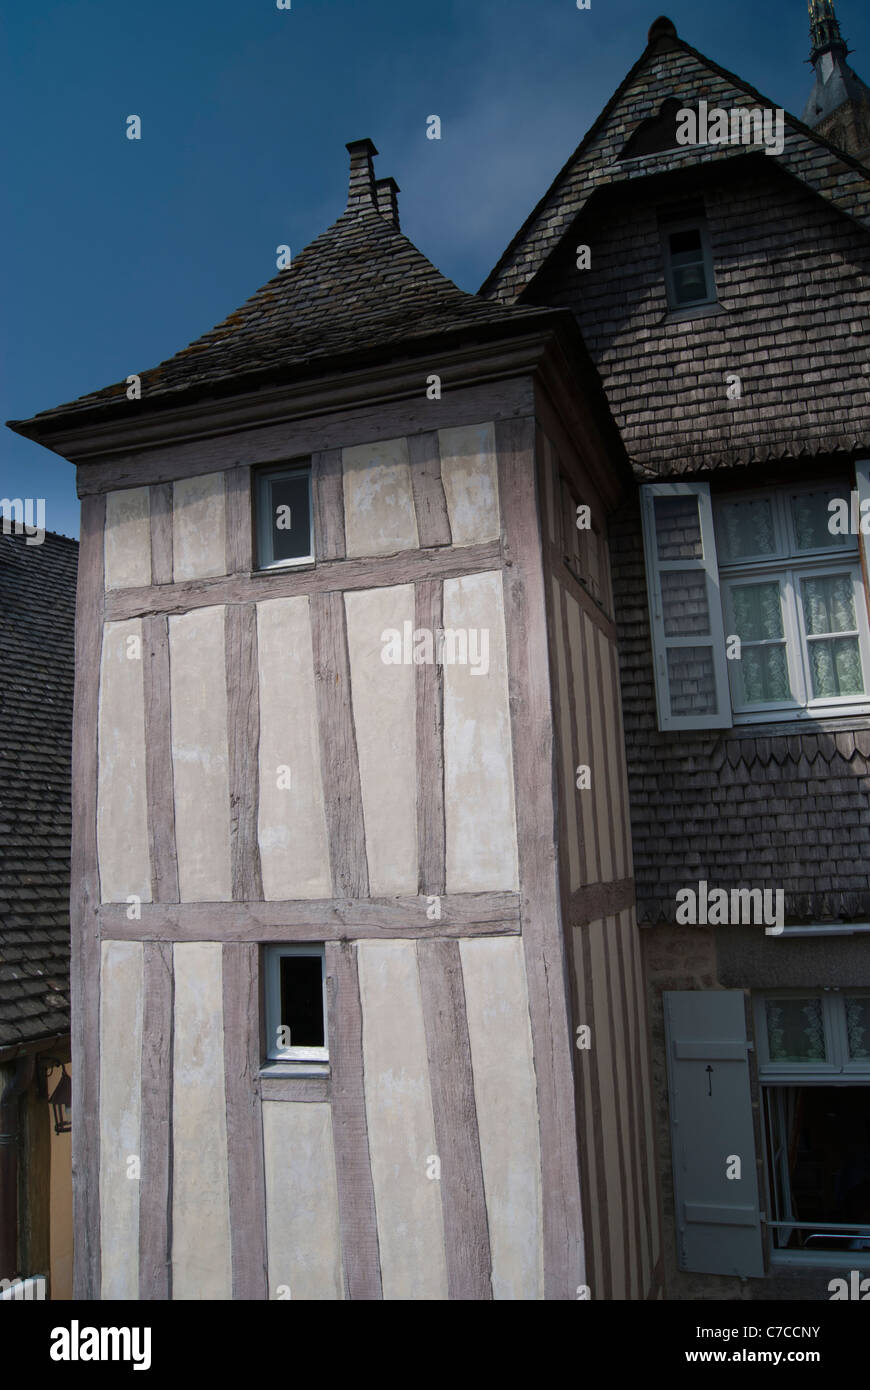 Half timbered narrow buildings with slate roofs and wooden shingles in town of Mont Saint Michel. Stock Photo